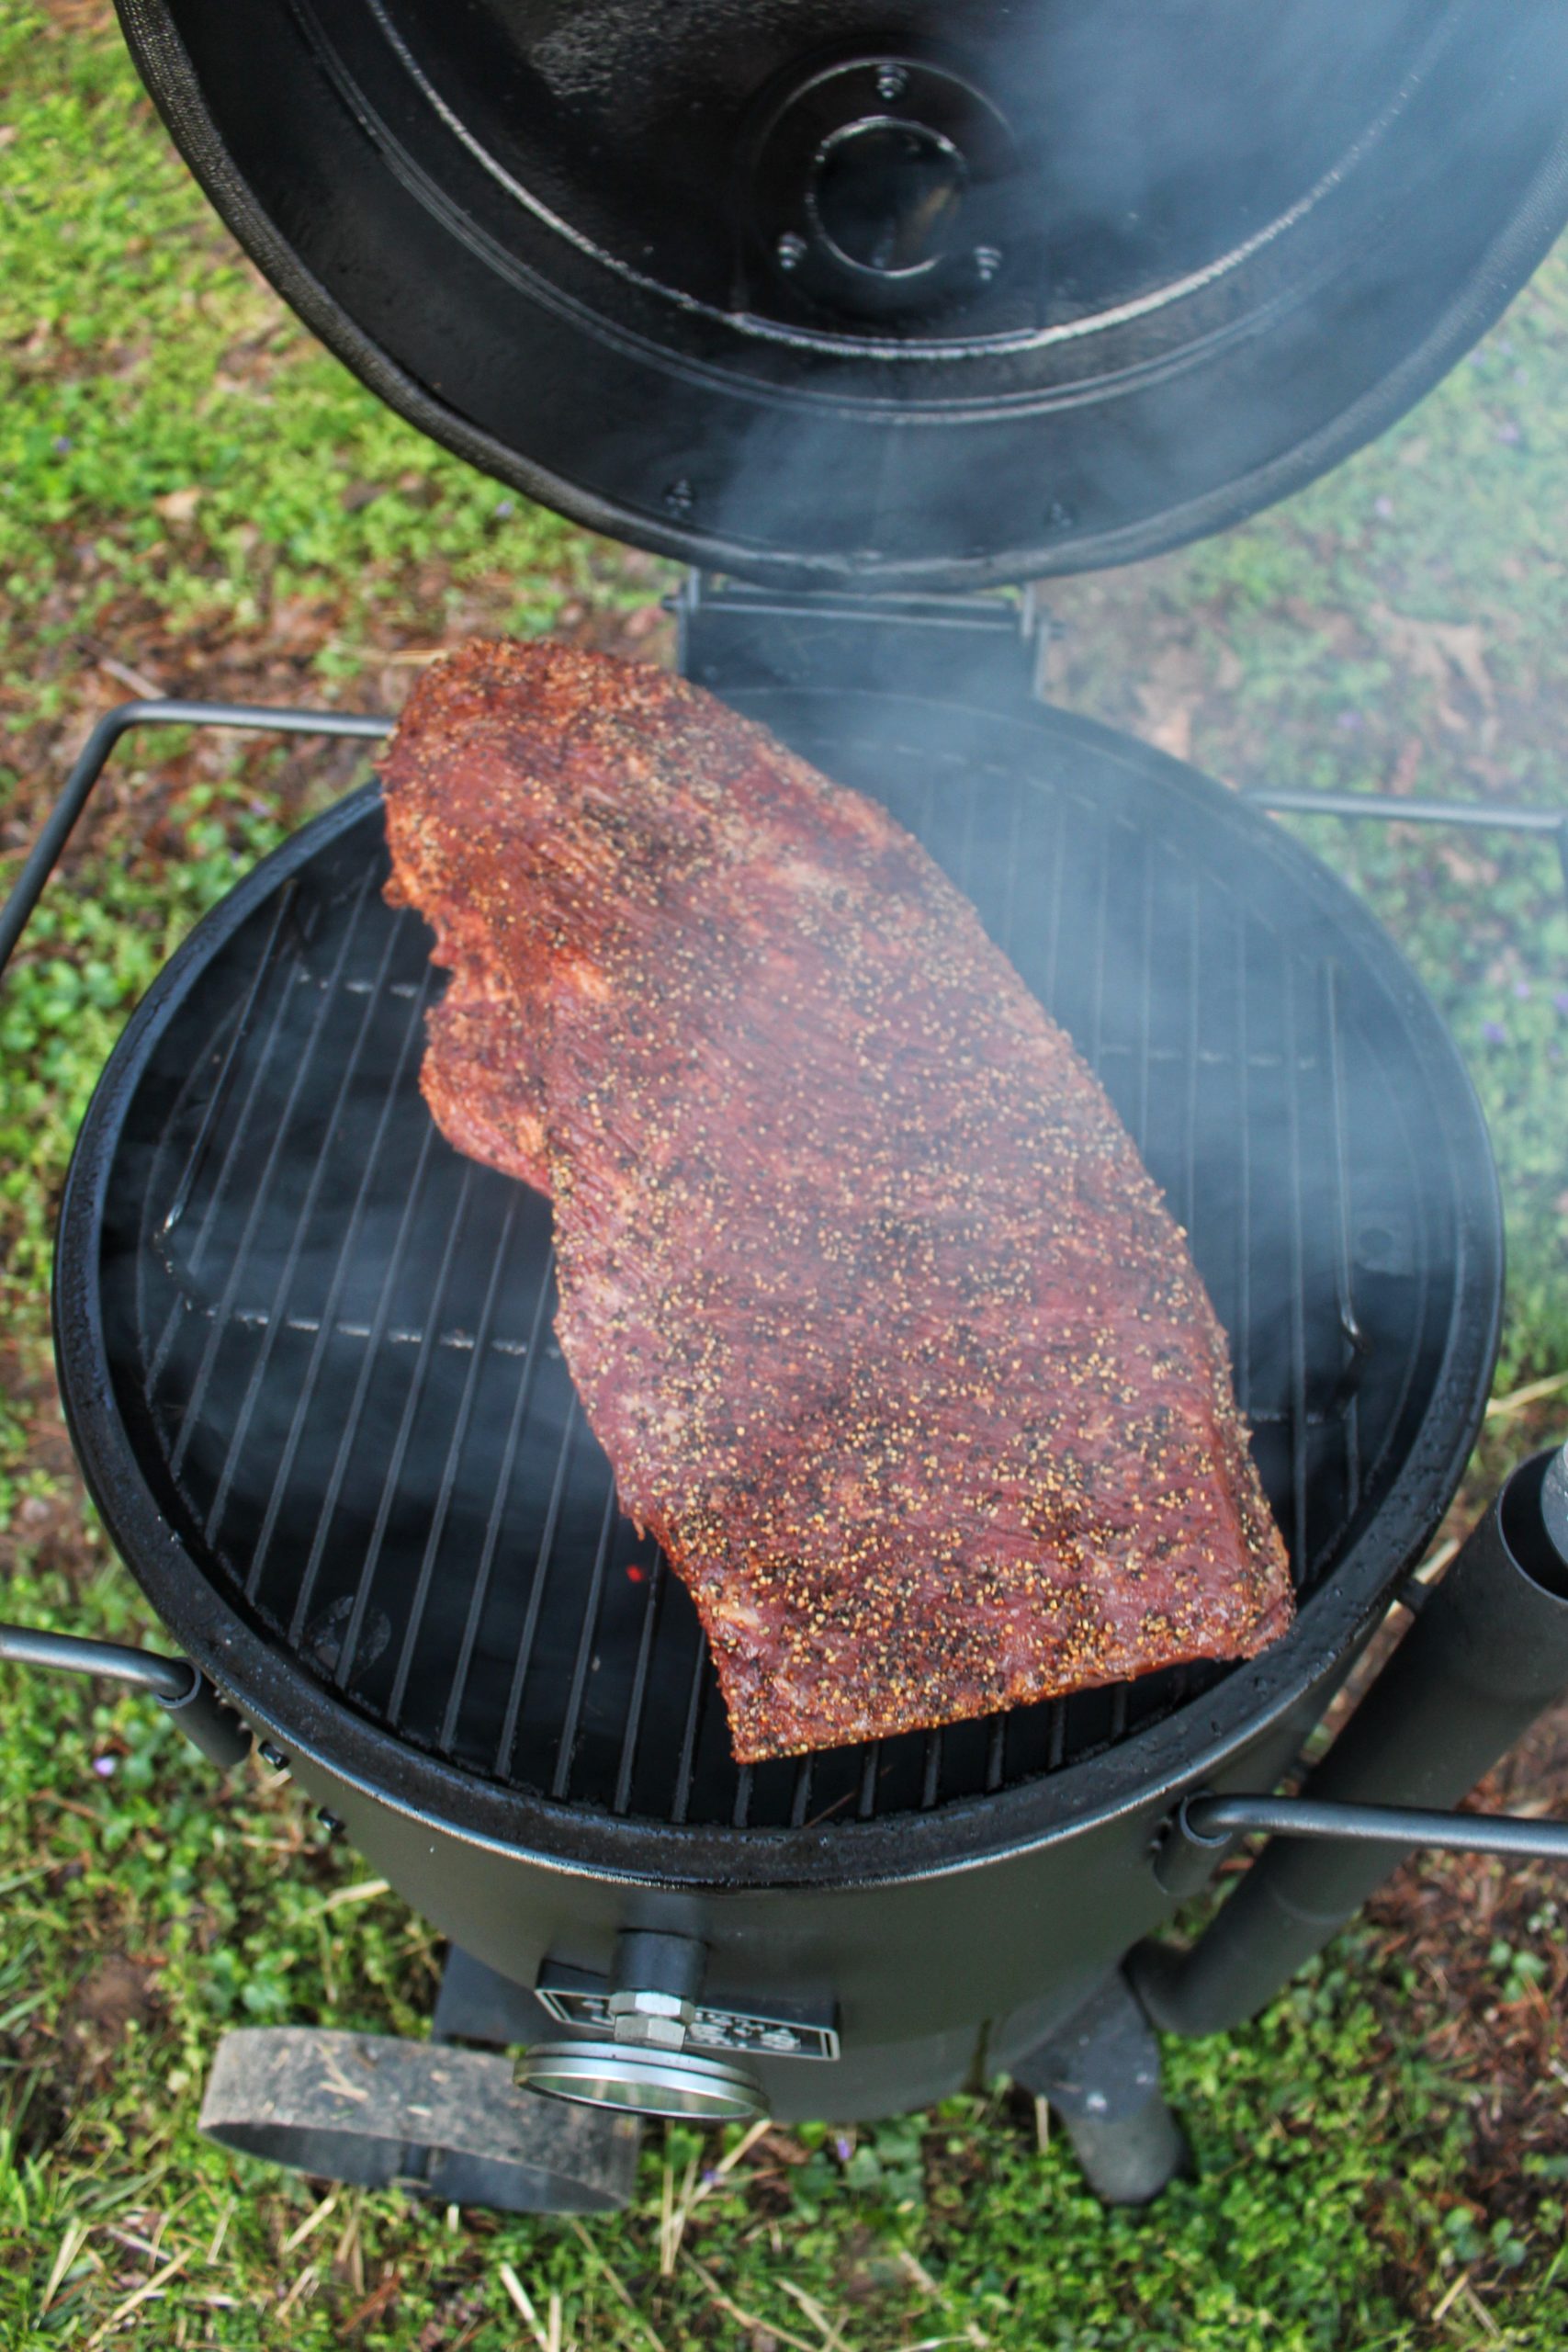 The easy smoked brisket getting started on the smoker.